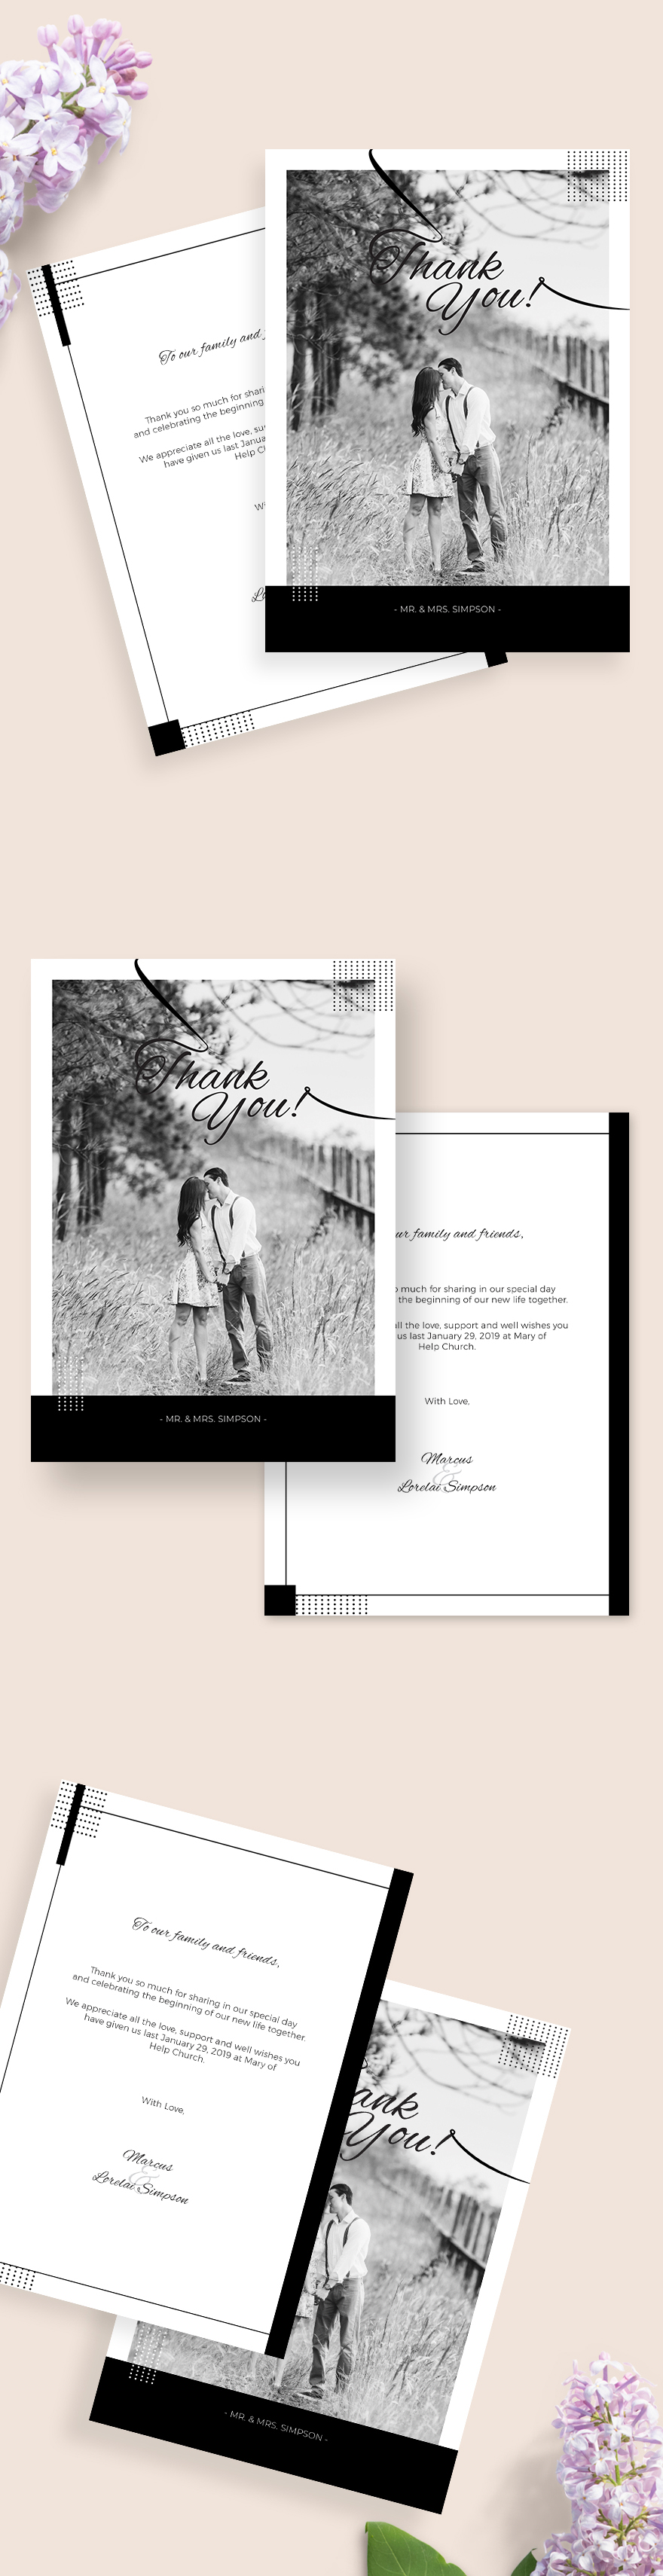 rustic-wedding-thank-you-card-template-illustrator-word-apple-pages